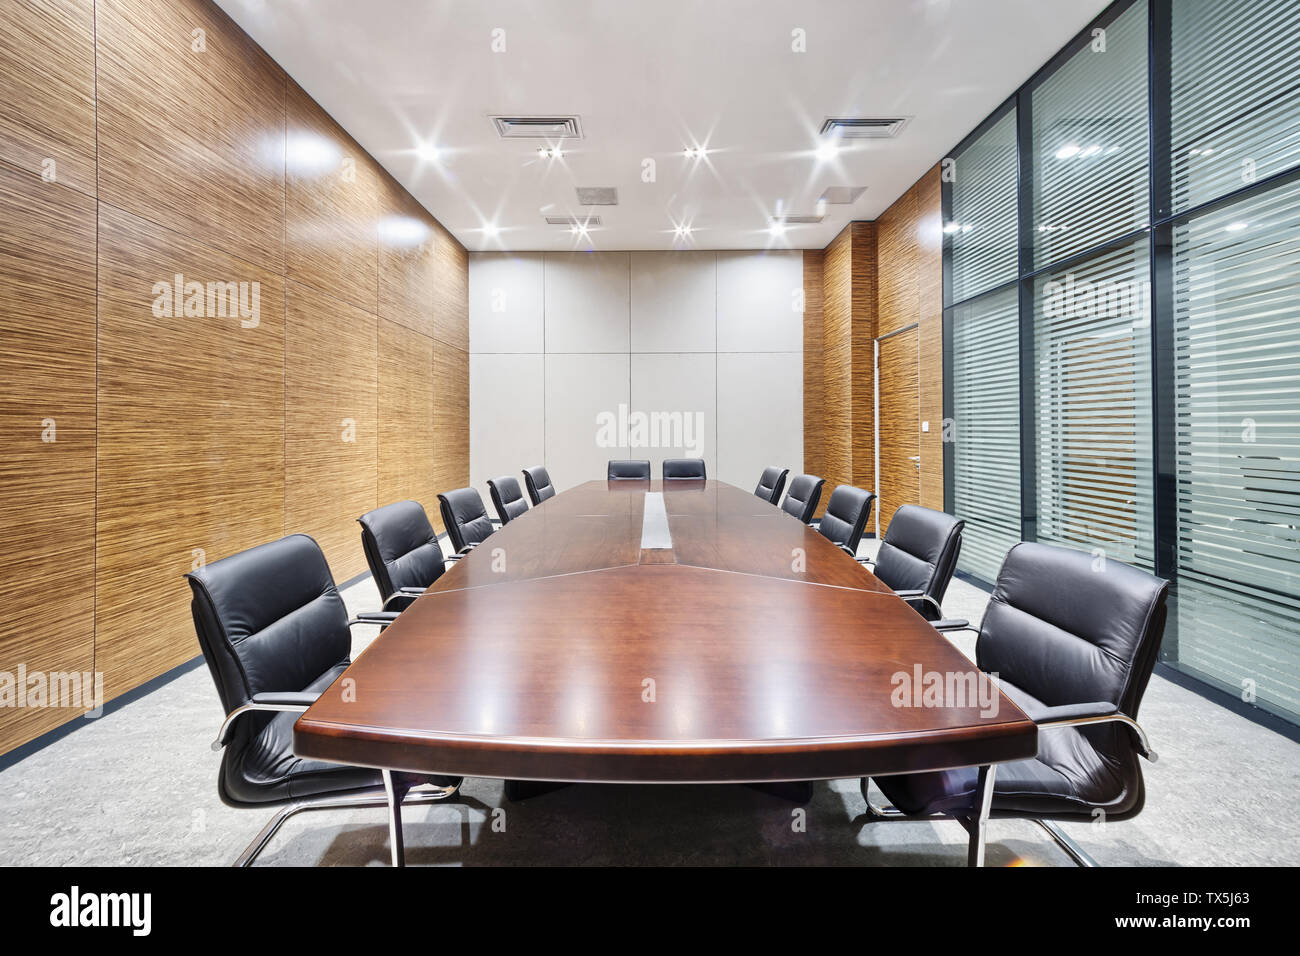 modern office meeting room interior and decoration Stock Photo - Alamy